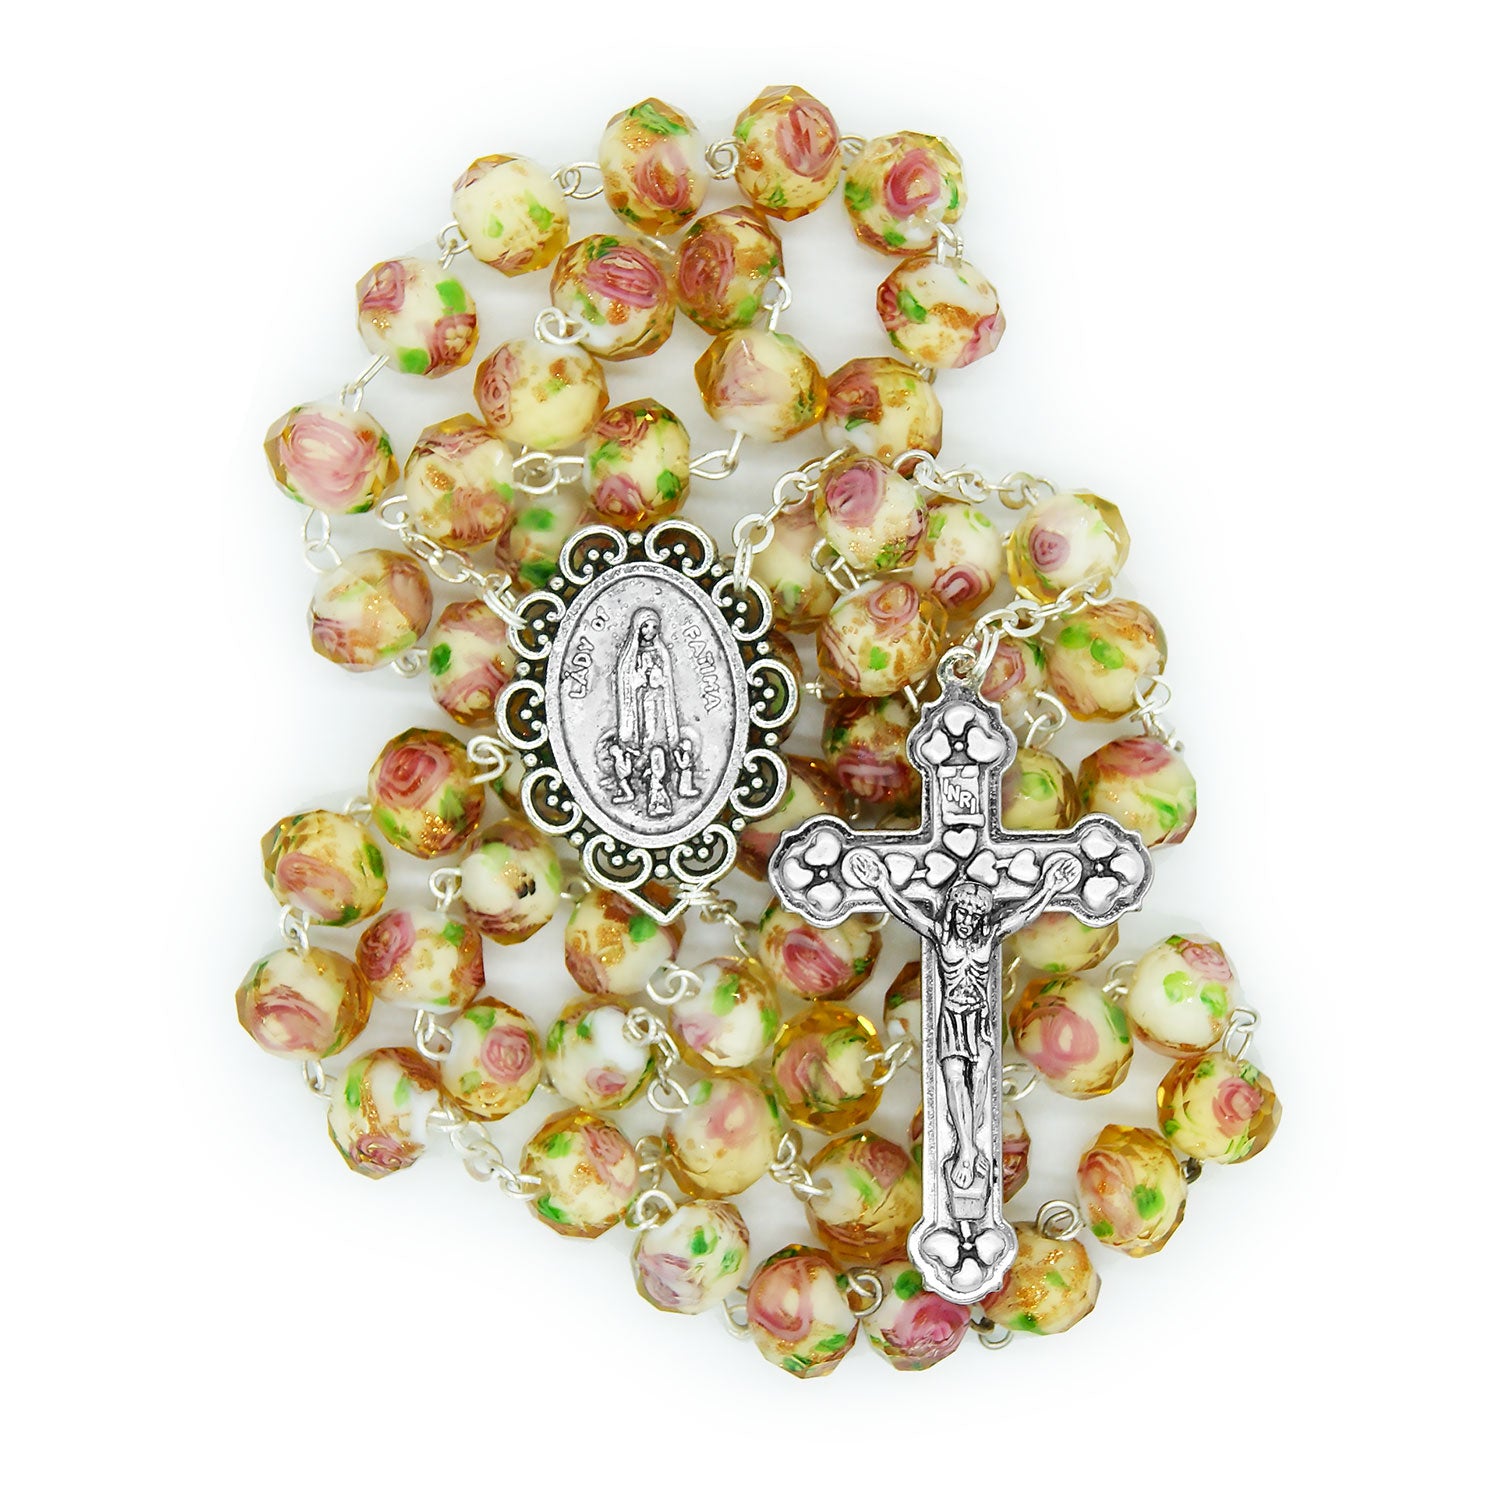 Catholic Handmade Our Lady of Fatima Rosary Murano Glass Beads Made in Portugal